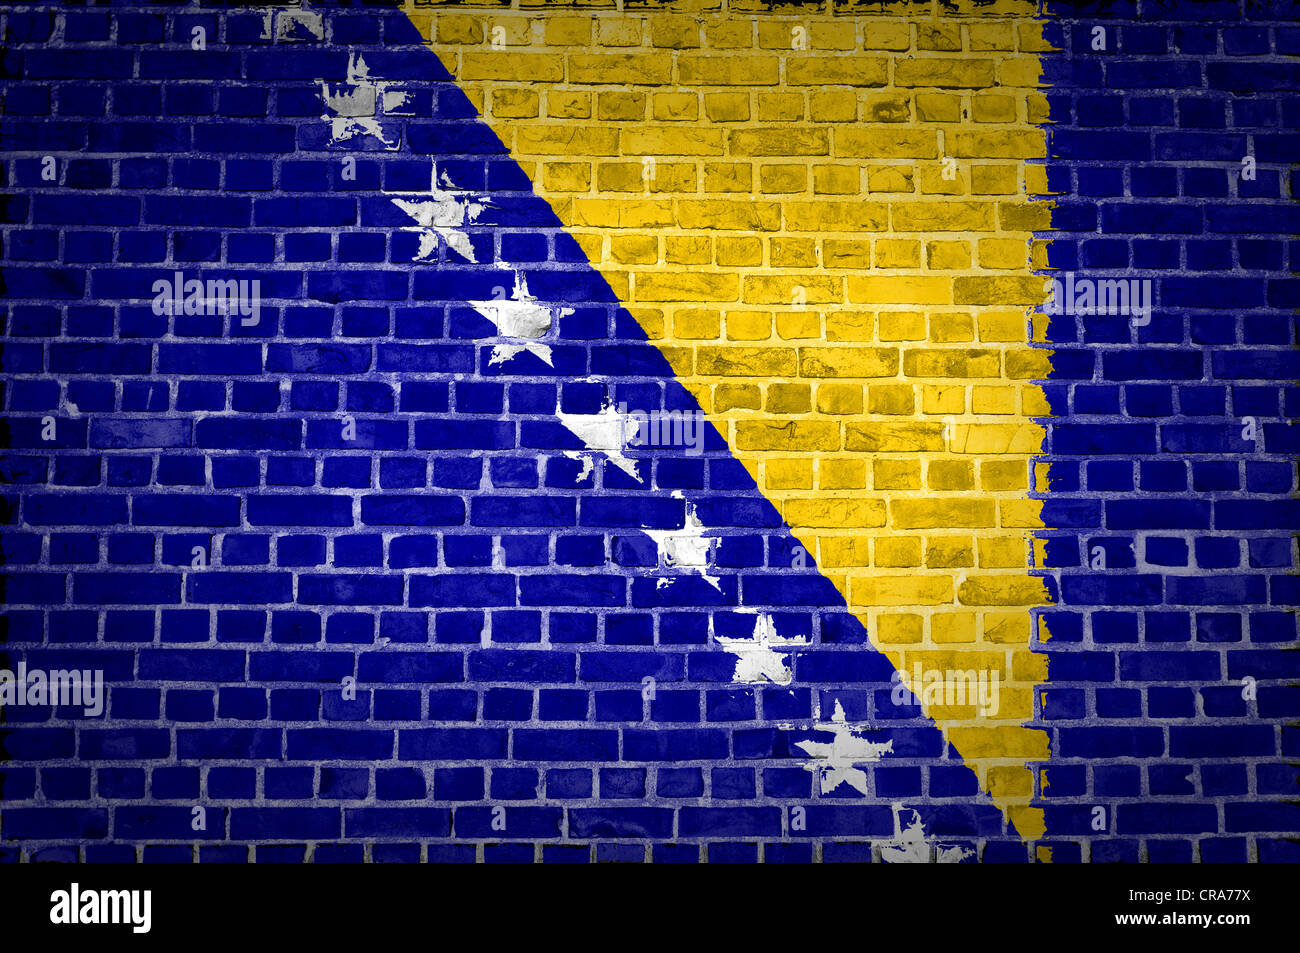 An image of the Bosnia and Herzegovina flag painted on a brick wall in an urban location Stock Photo